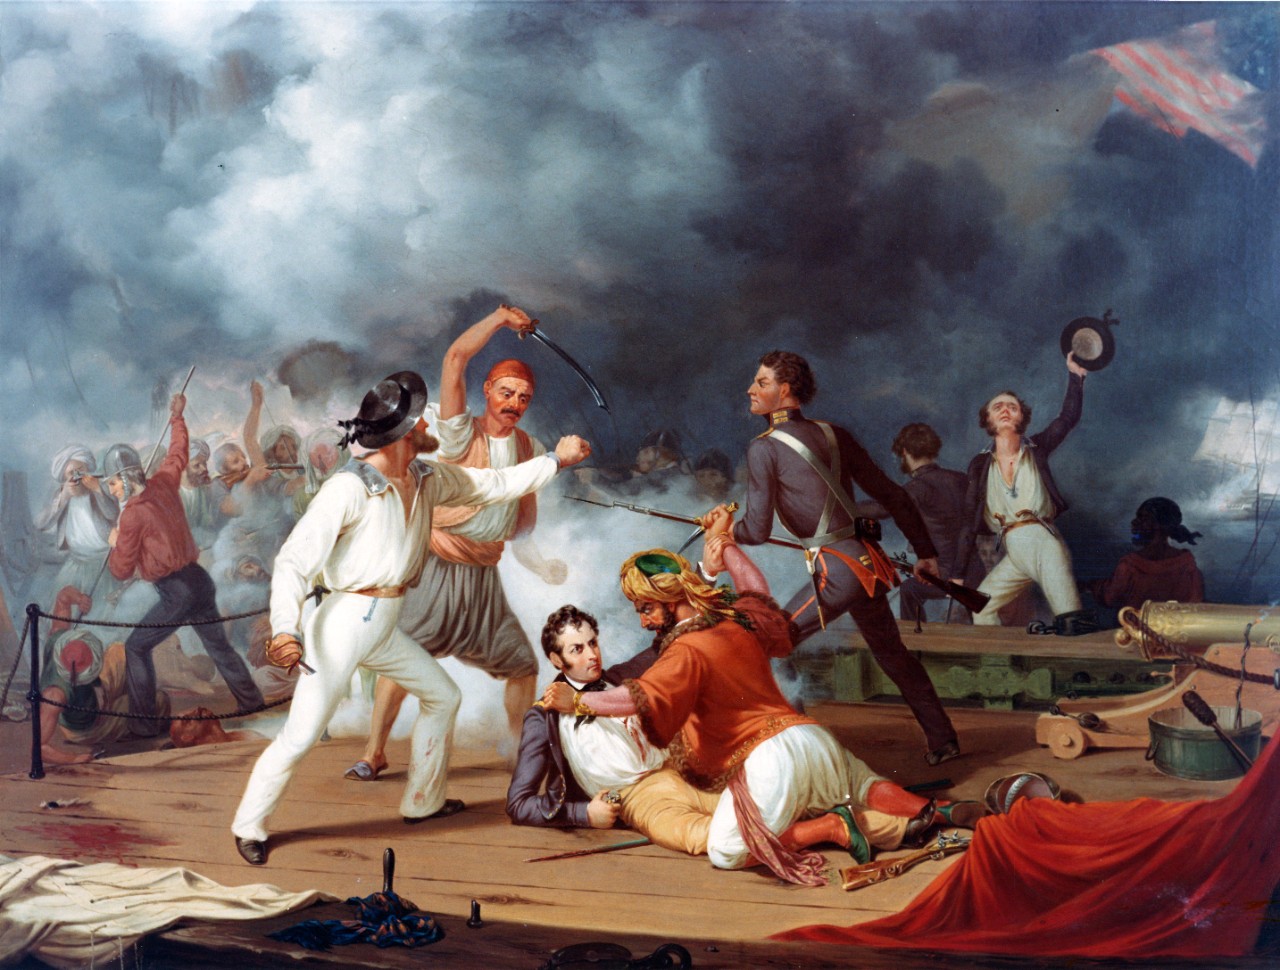 Photo #: KN-10949 "Stephen Decatur's Conflict with the Algerine at Tripoli"